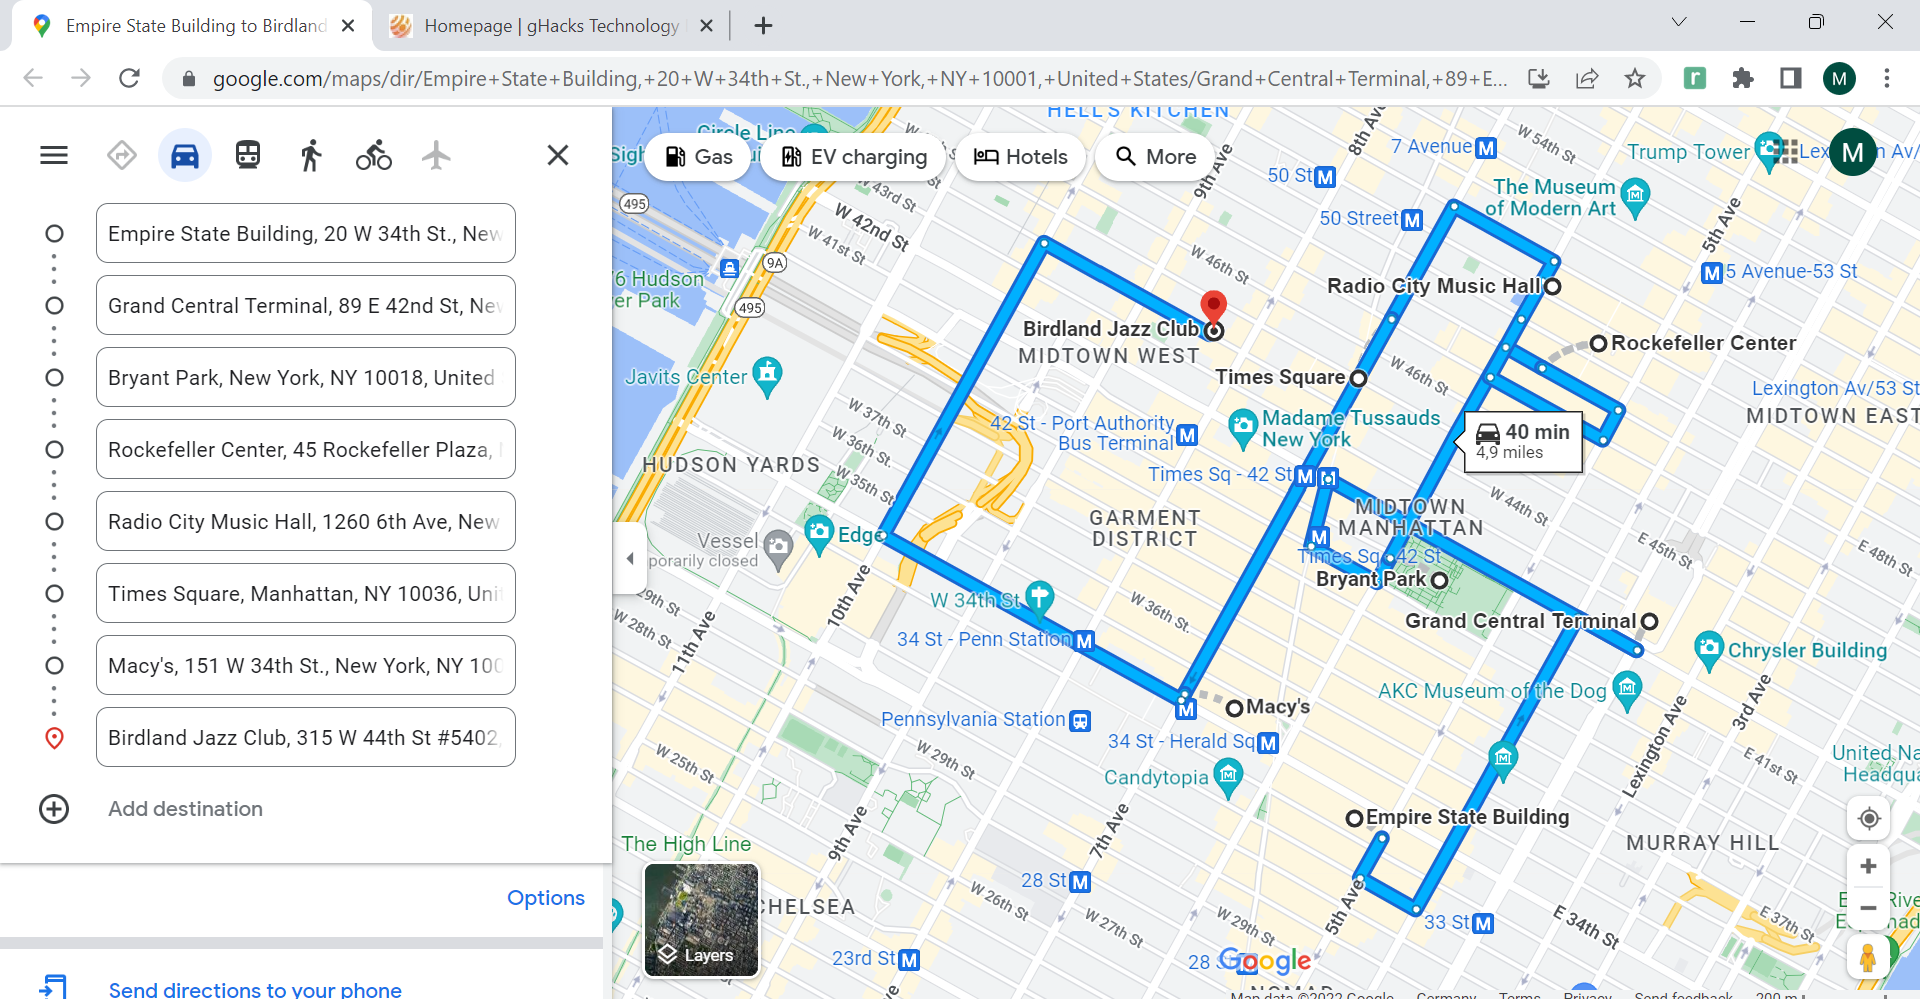 Routora optimizes Google Map multi-stop routes to save gas and time